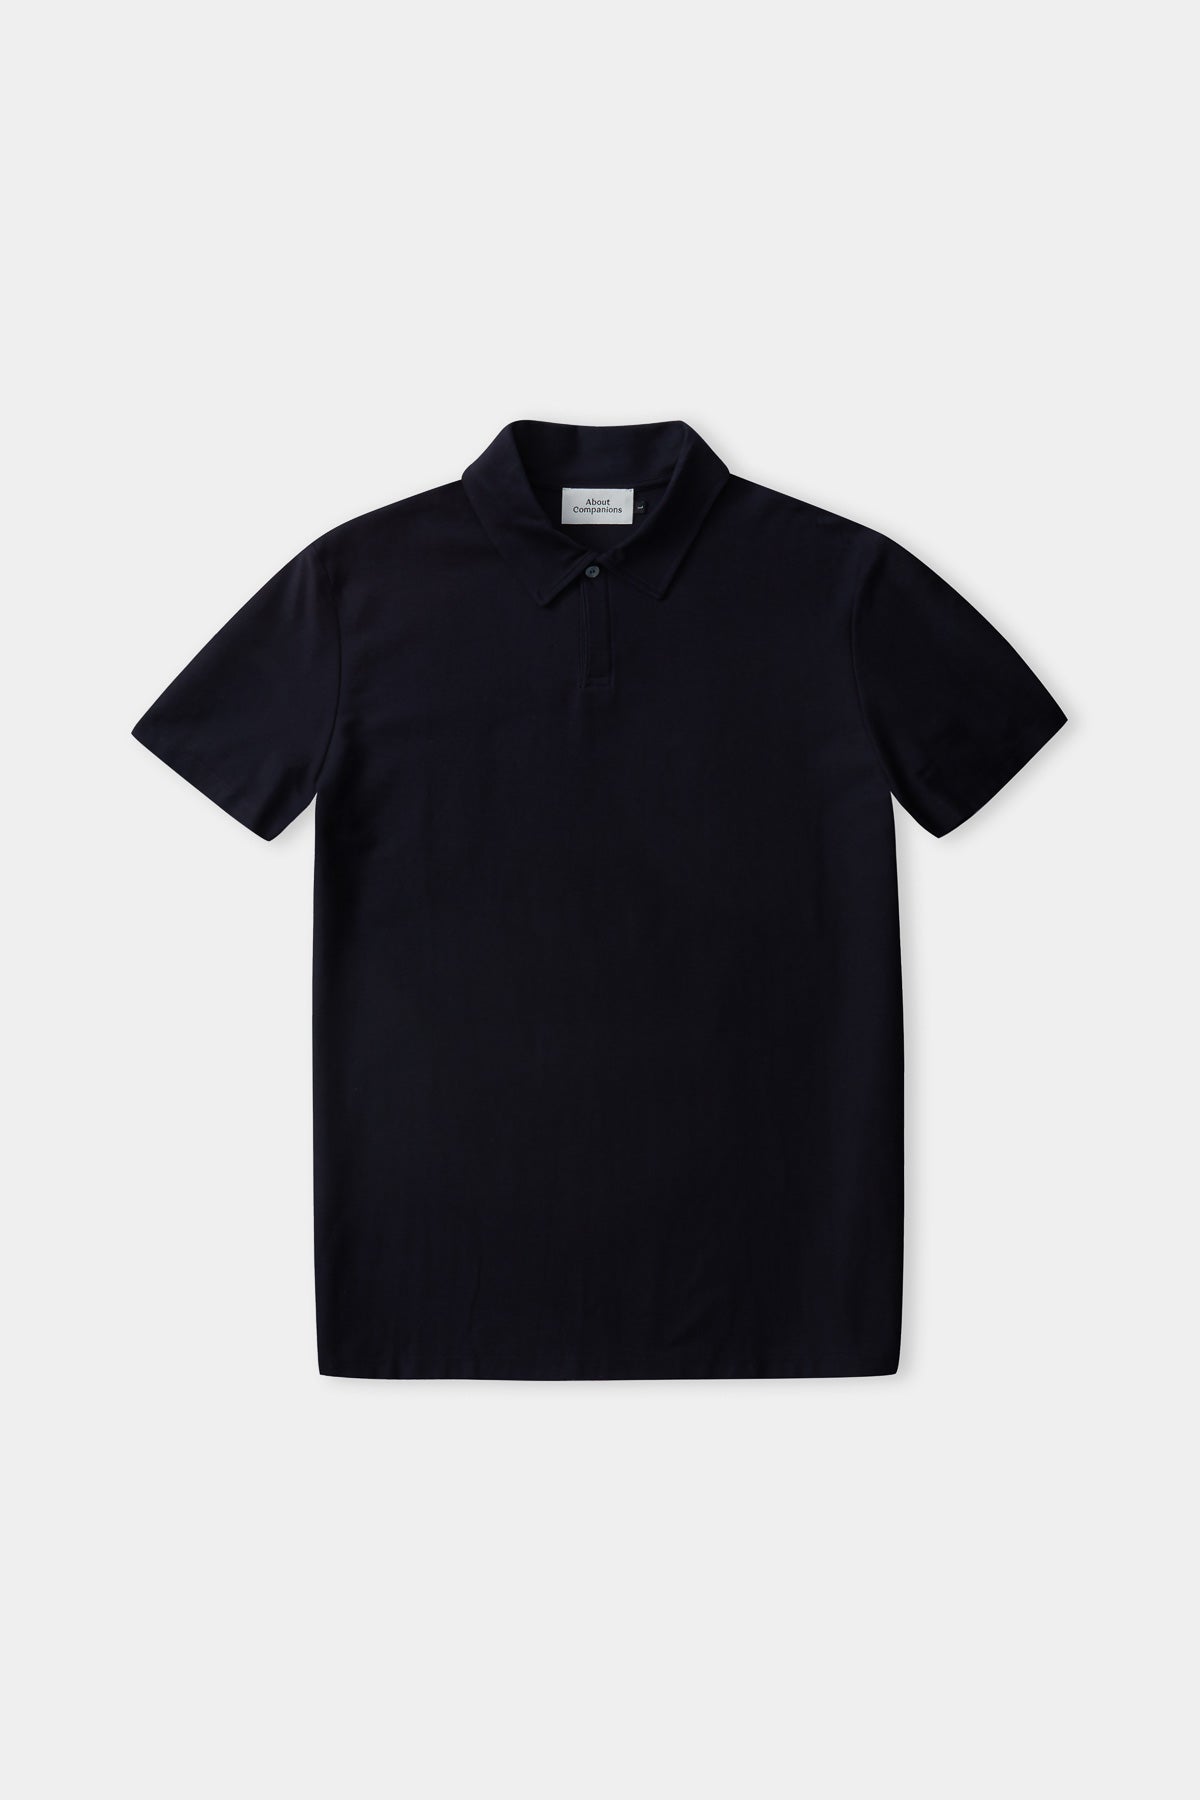 todd polo, eco loopback navy - about companions